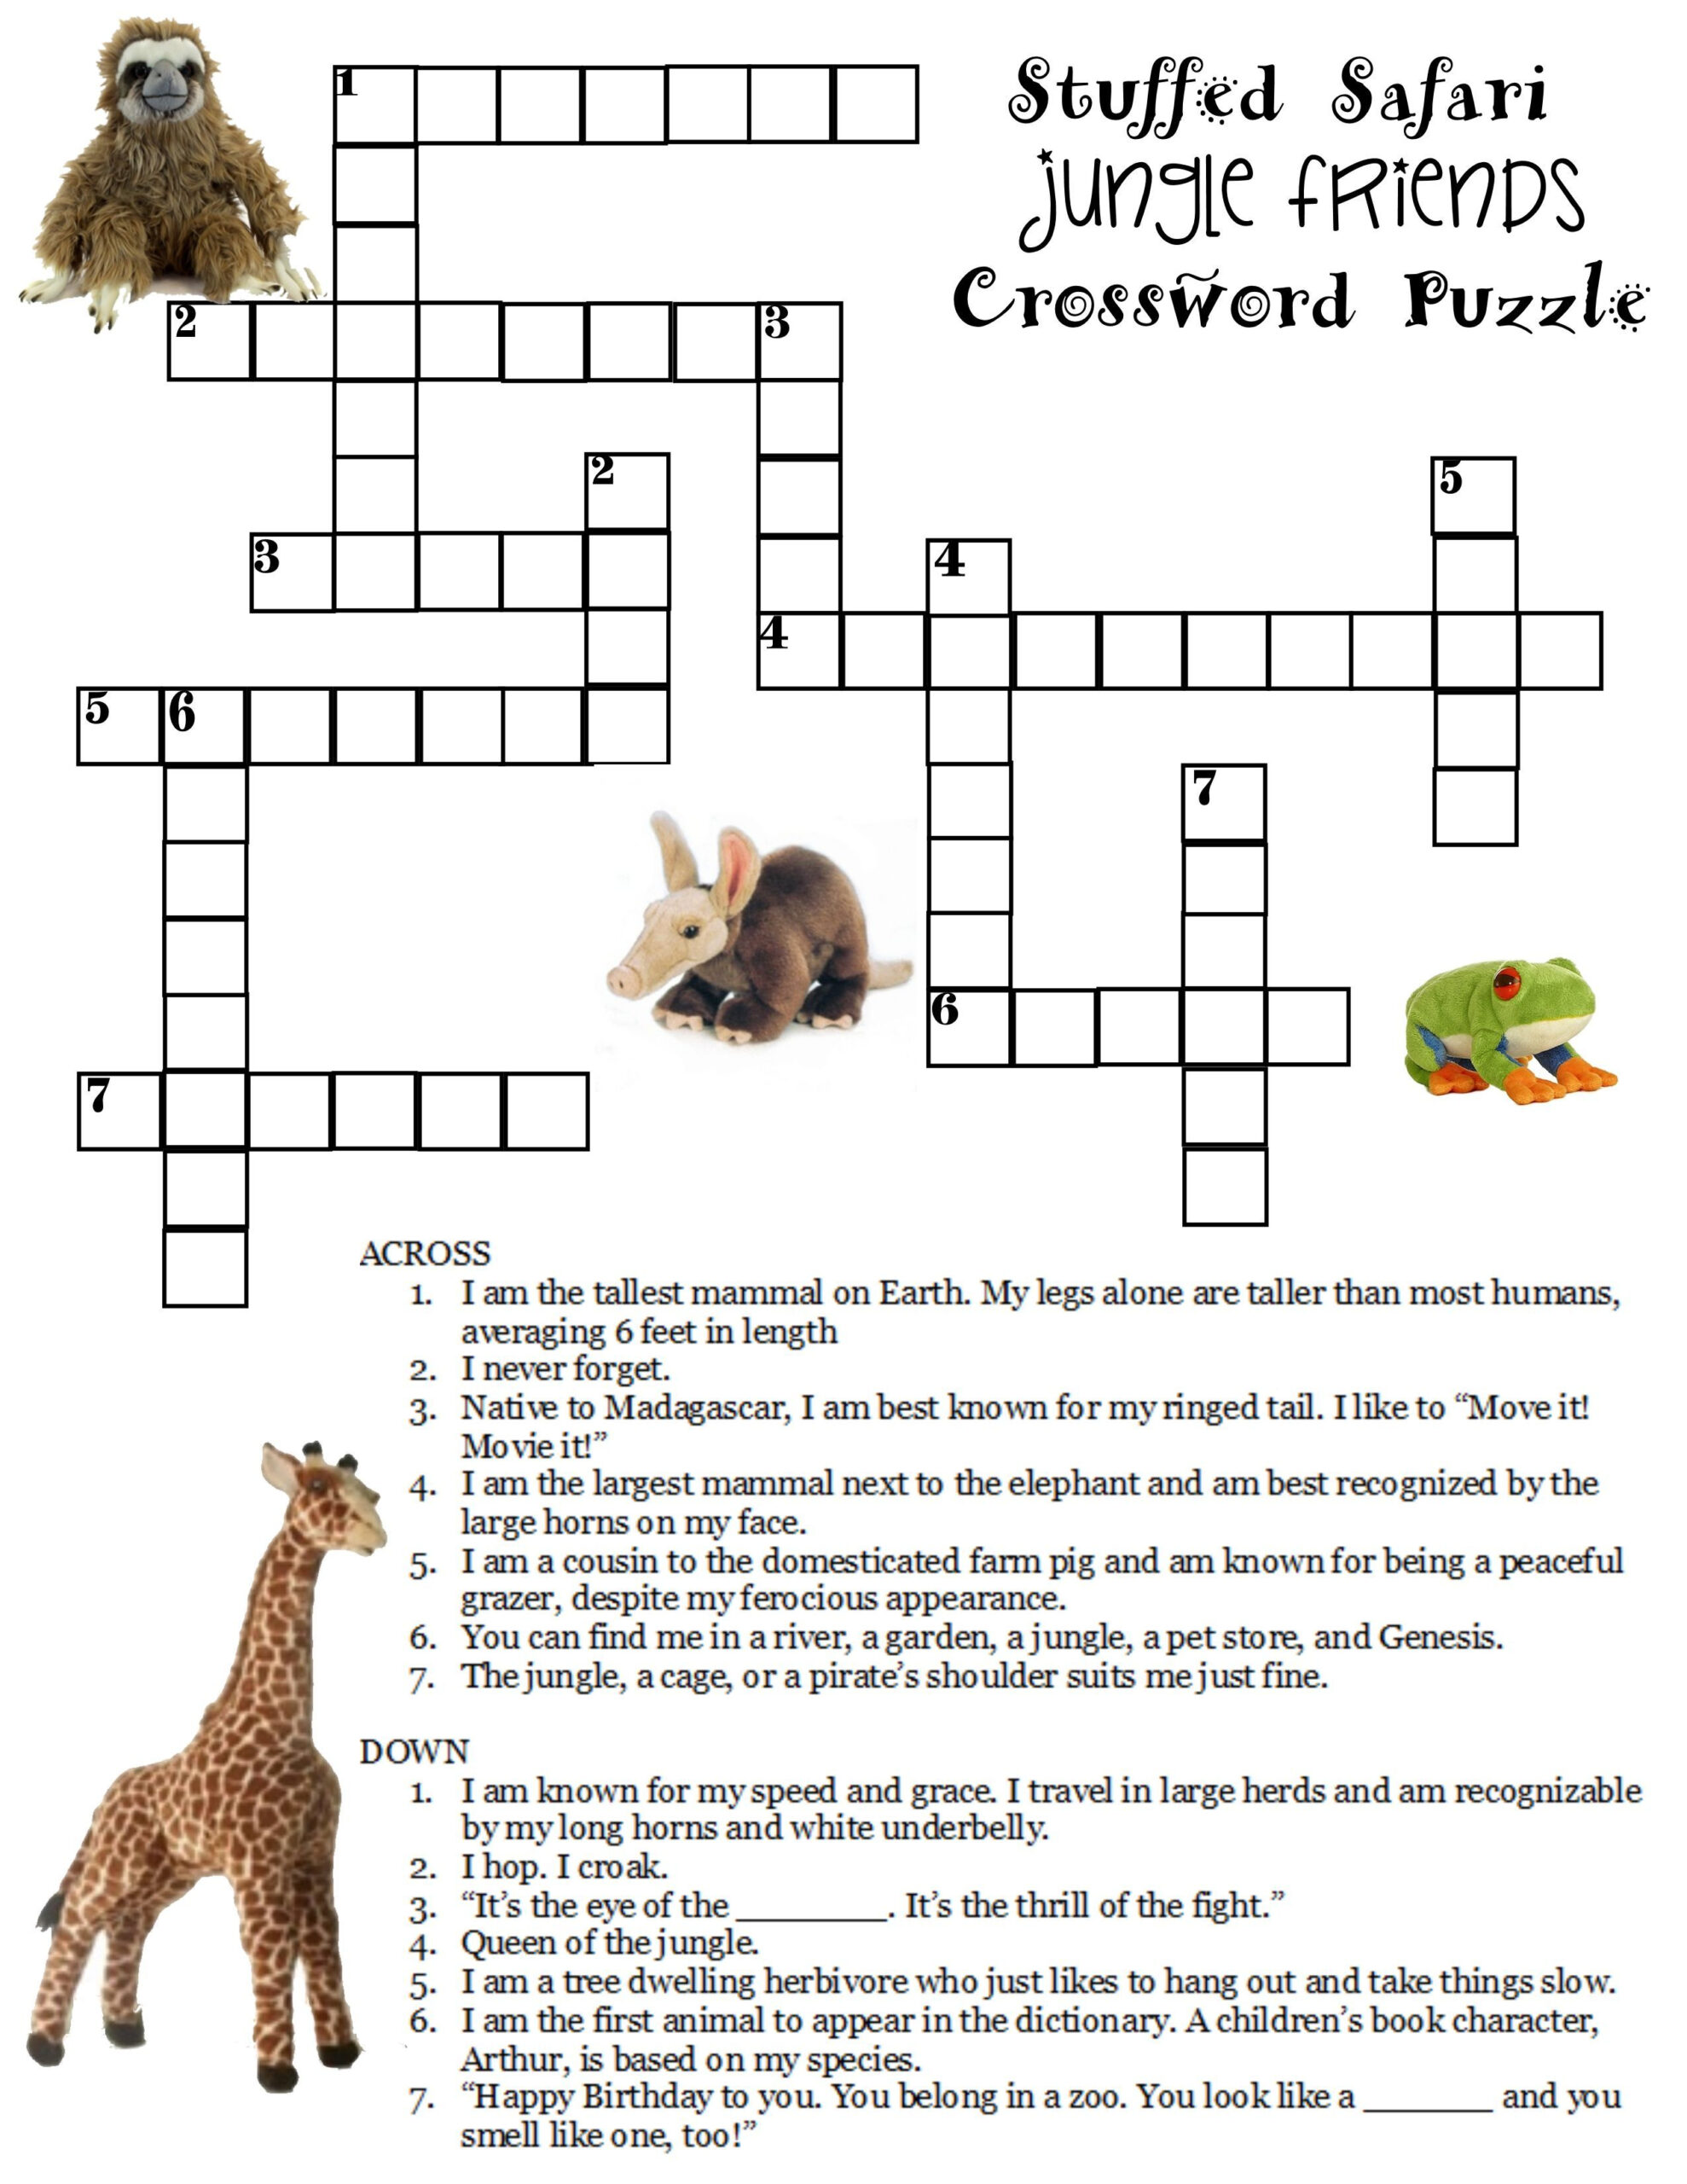 Here Is A Free Jungle Crossword Puzzle Compliments Of Stuffedsafari 